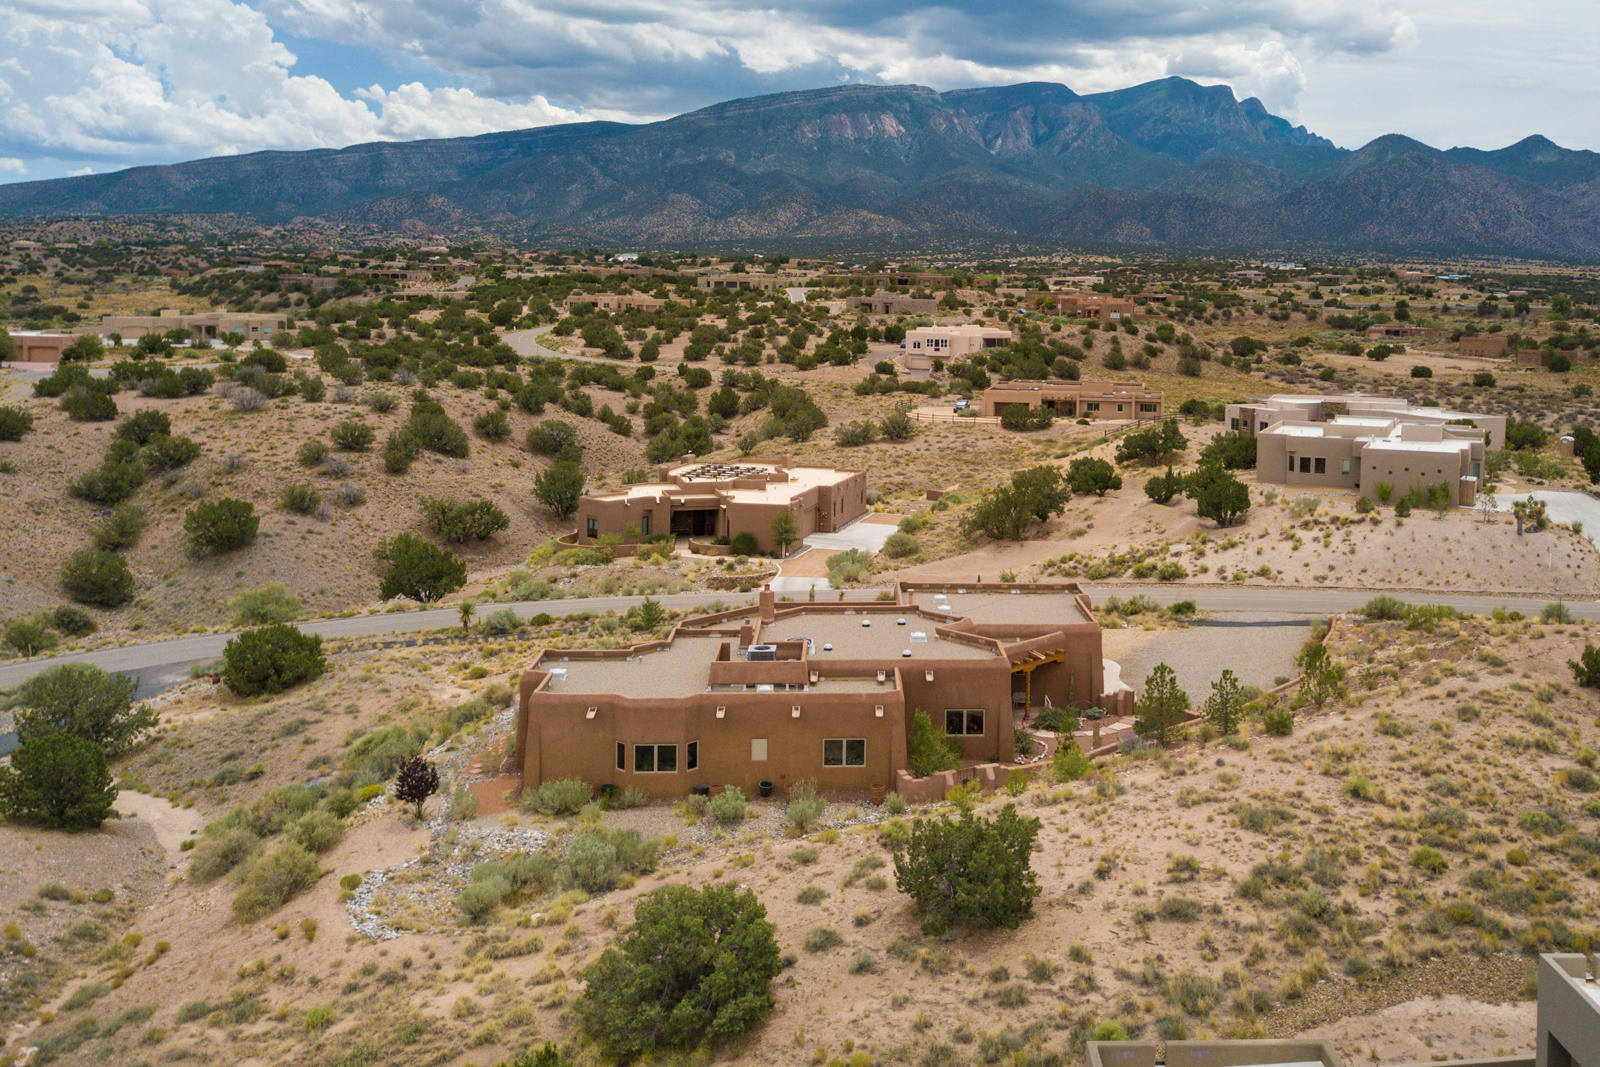 This single-level Southwest style home, located on a .91 acre view lot in Anasazi Meadows, was built with the incredible views of the Sandia Mountains in mind. Its features include raised, beamed and latilla ceilings, tile floors throughout, lighted nichos and custom wood burning kiva fireplaces in the great room & master. The kitchen features custom cabinets w/ pull out shelves, level 5 granite counters, stainless appliances, pantry and breakfast bar. Enjoy the views from the spacious master bedroom which features an exercise/sitting area opening to the covered patio. The en-suite bath features a massive closet, jacuzzi tub, large shower and water closet. Outdoor living spaces offer many opportunities for entertaining or relaxing! Please click ''more'' for additional features & info